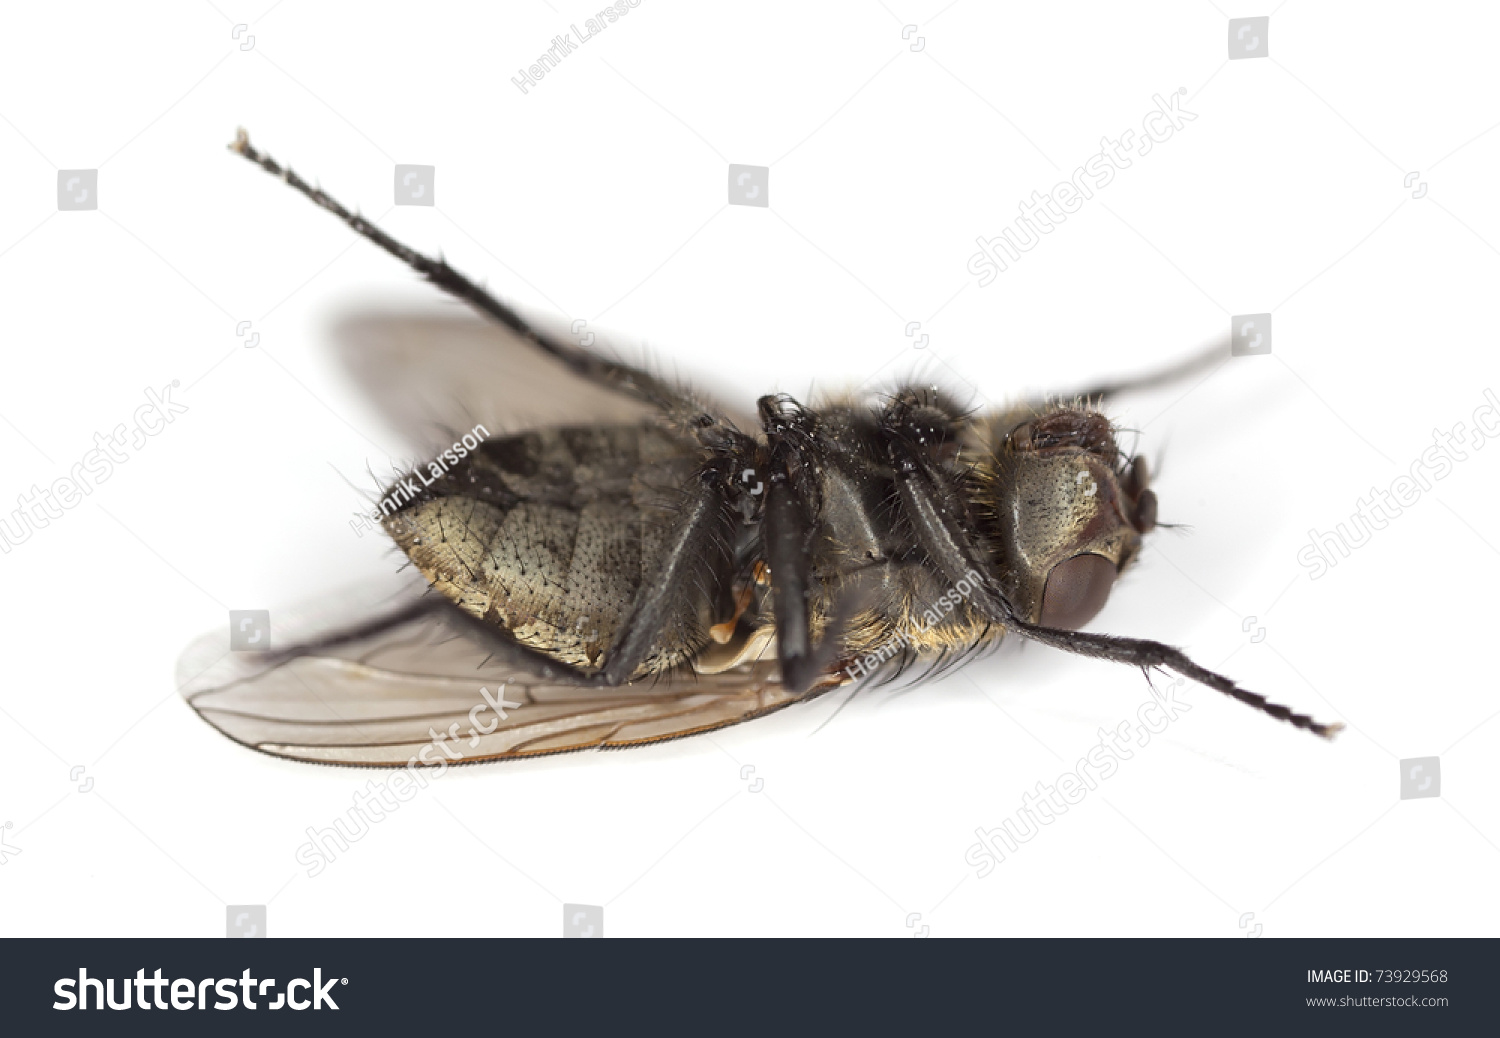 Extreme close-up of dead House fly isolated on white background #73929568